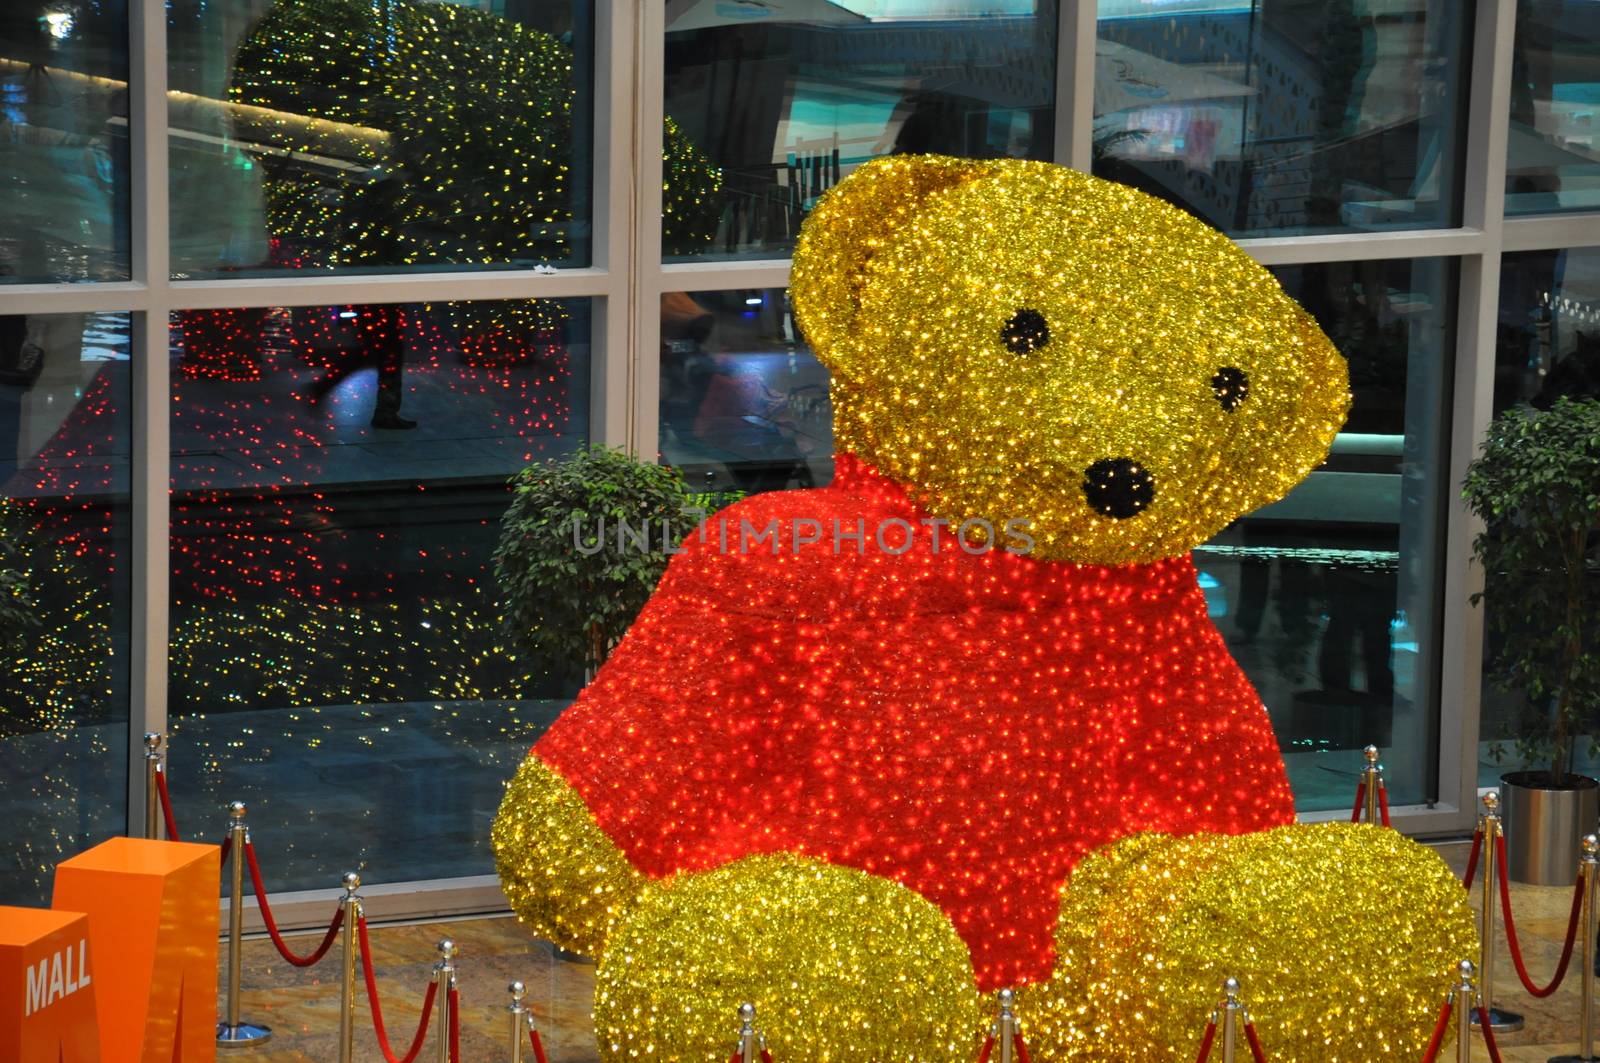 Teddy Bear at Festival Centre Mall in Dubai, UAE, as seen on Feb 8, 2014. Dubai Festival City is the Middle East's largest mixed-use development.